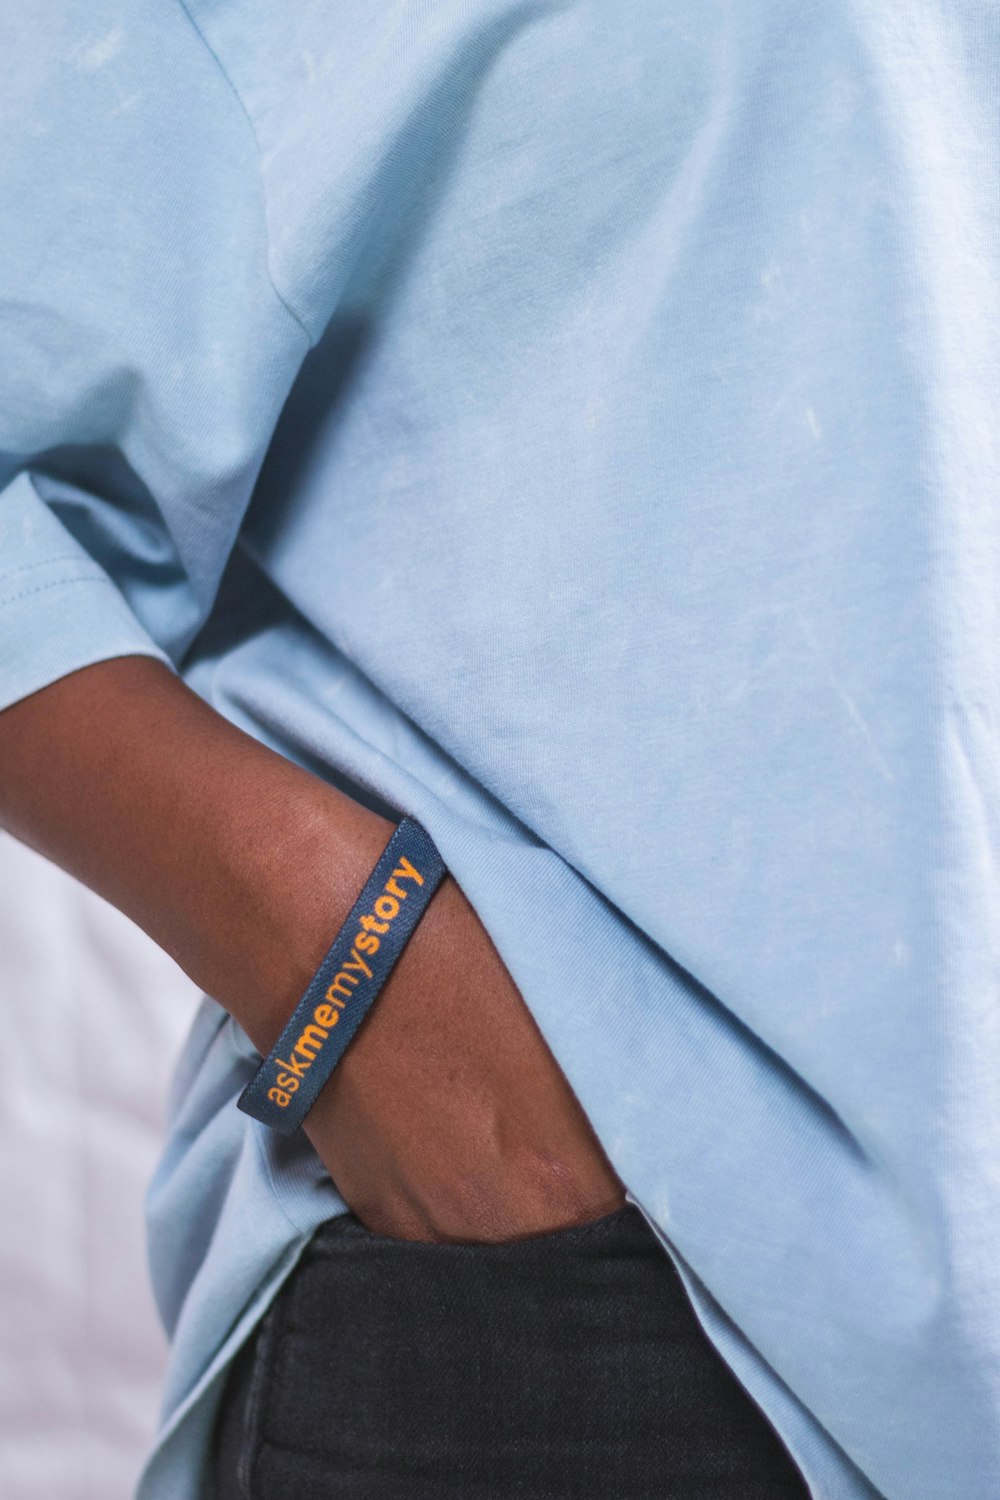 a person wearing a blue shirt and a blue wristband